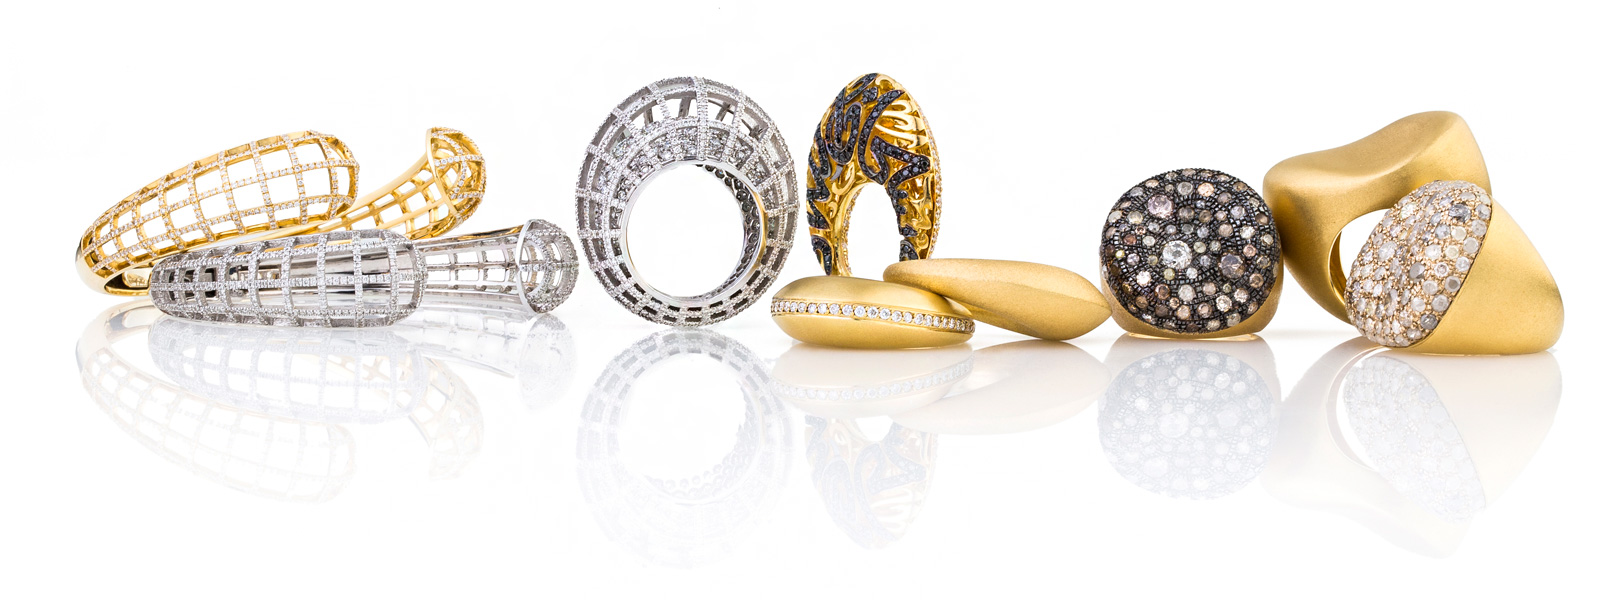 Nada G rings and bracelets in yellow and white gold with diamonds